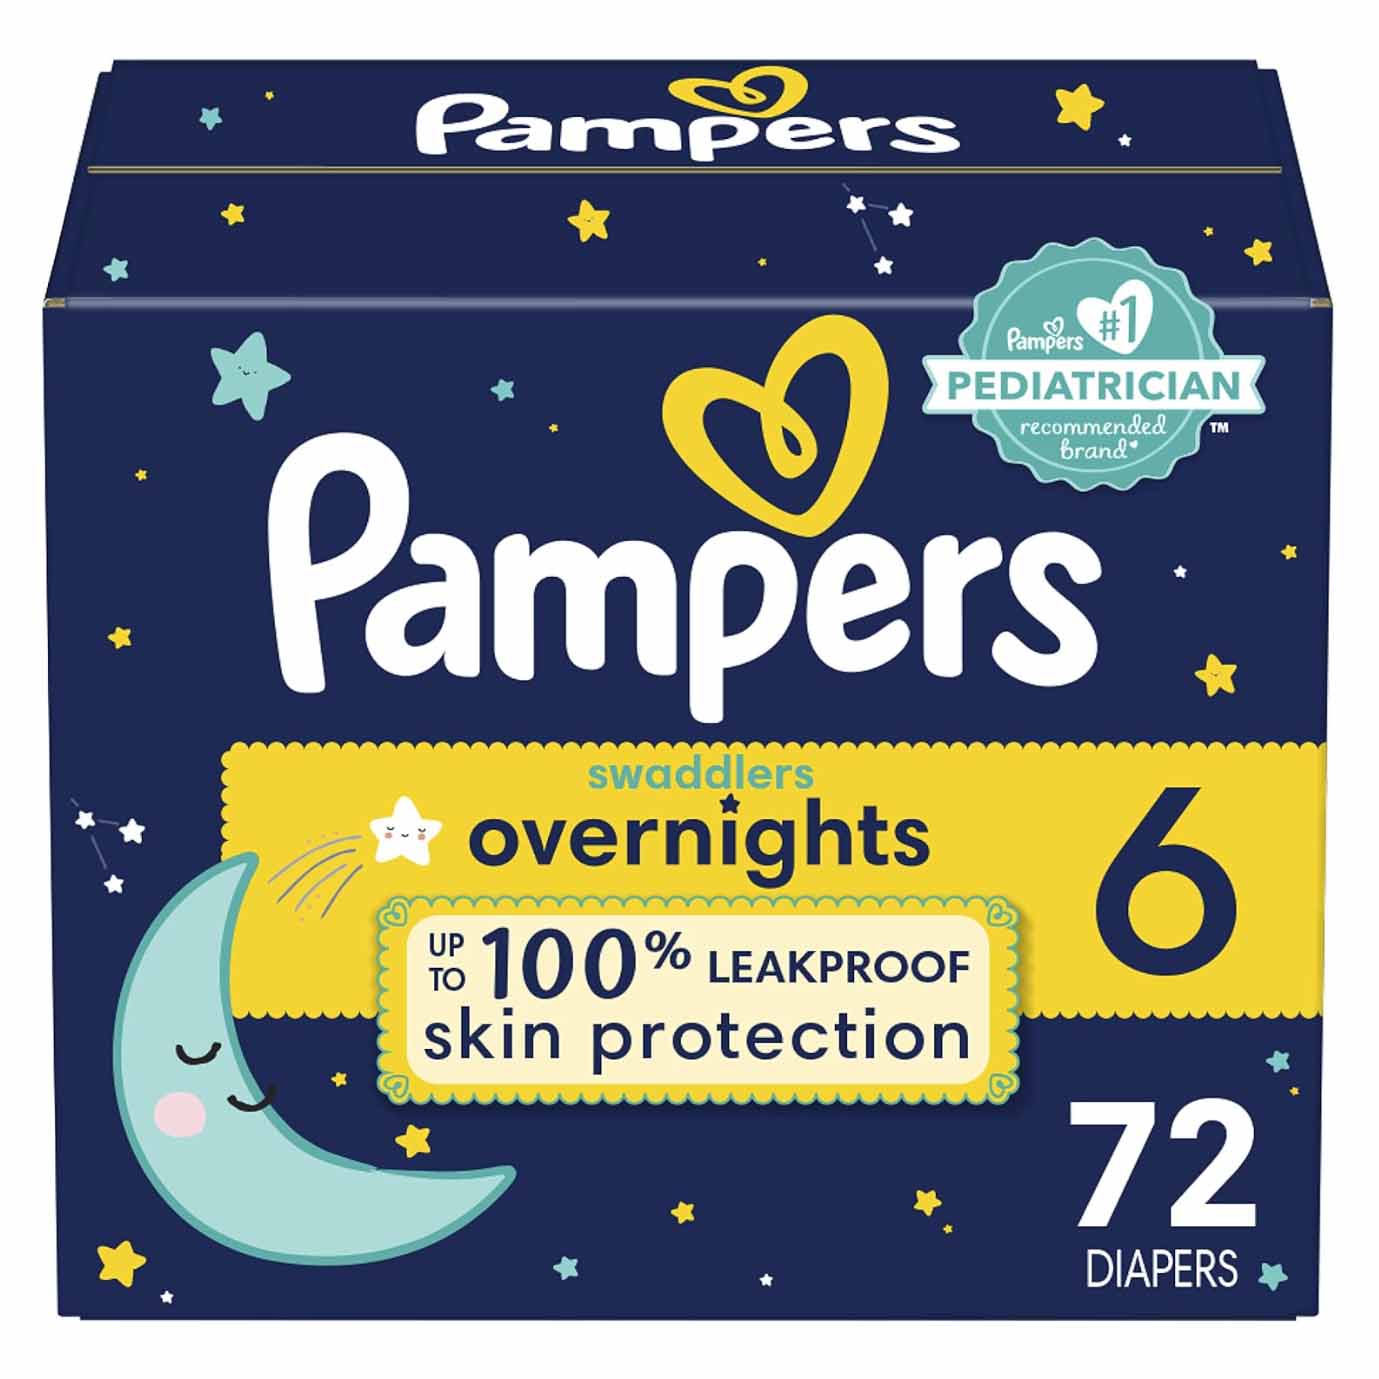 Pampers in dark blue and yellow box